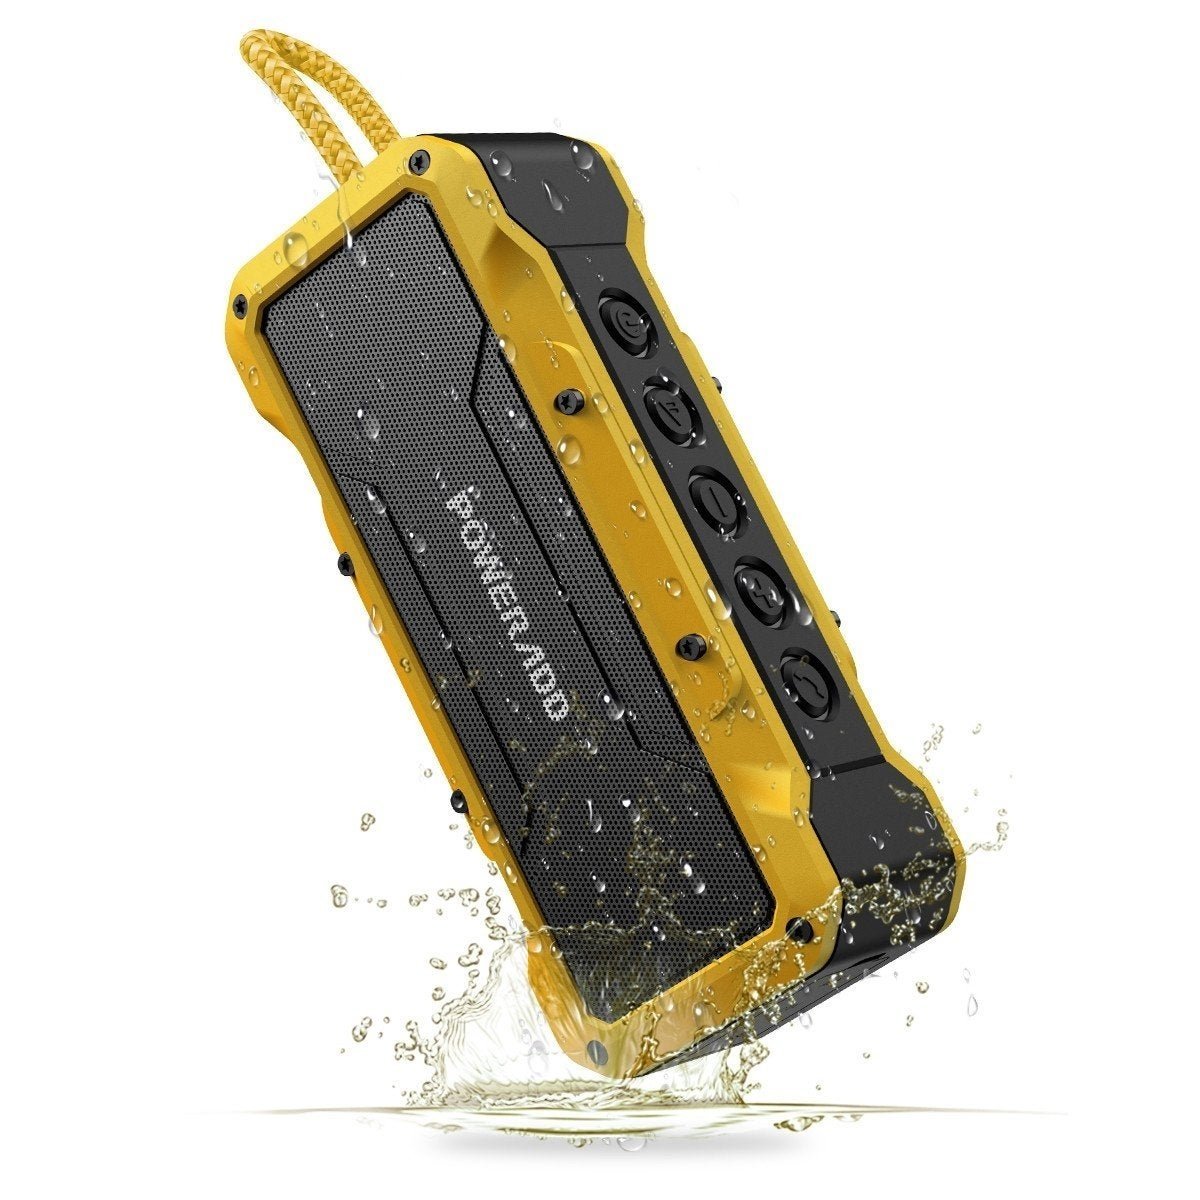 POWERADD Impermeable IPX7